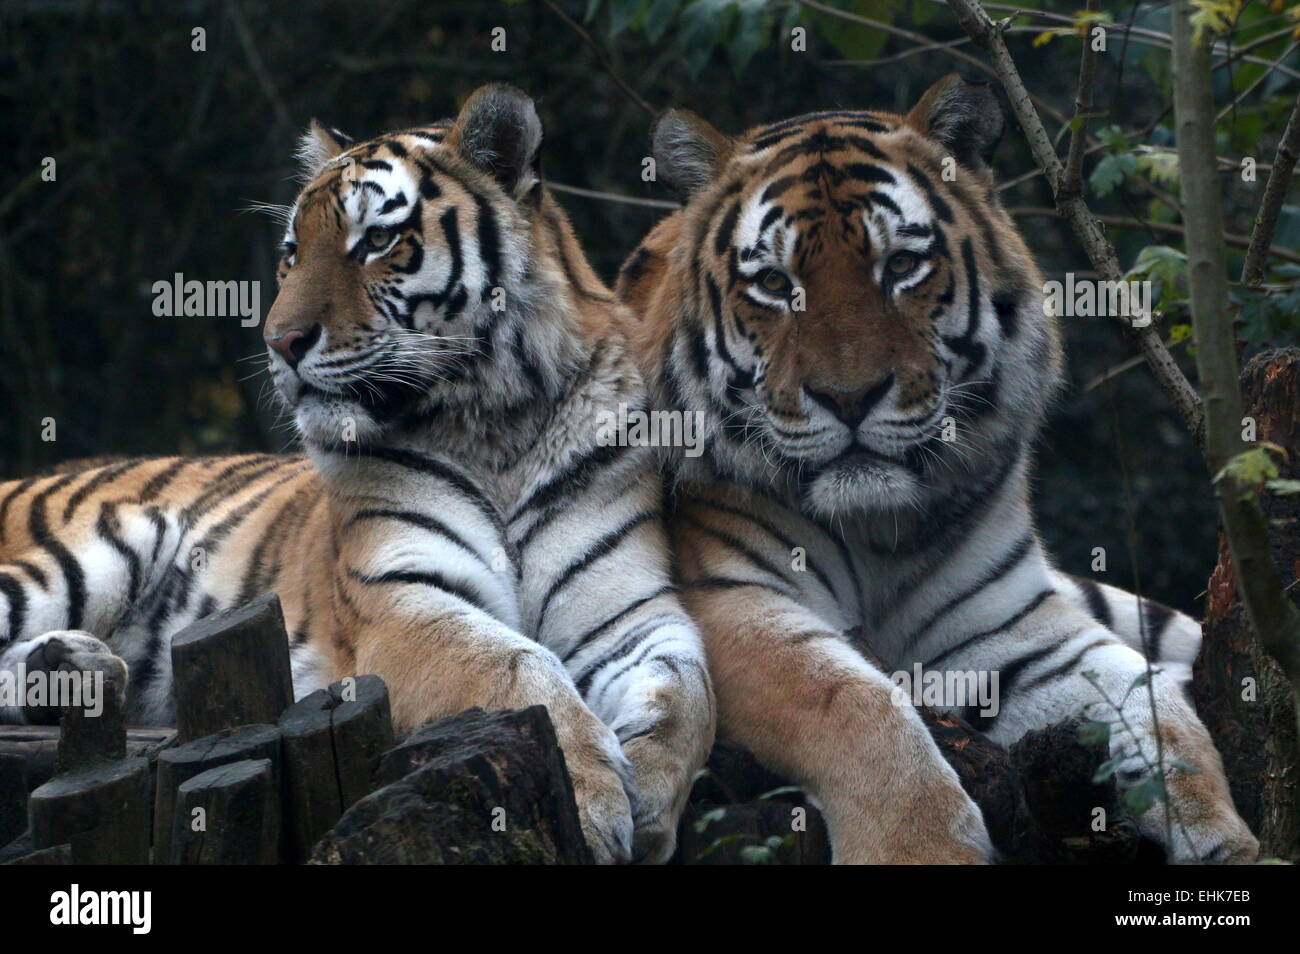 Male and female Siberian or  Amur tiger (Panthera tigris altaica) posing together at Dierenpark Amersfoort Zoo, The Netherlands Stock Photo